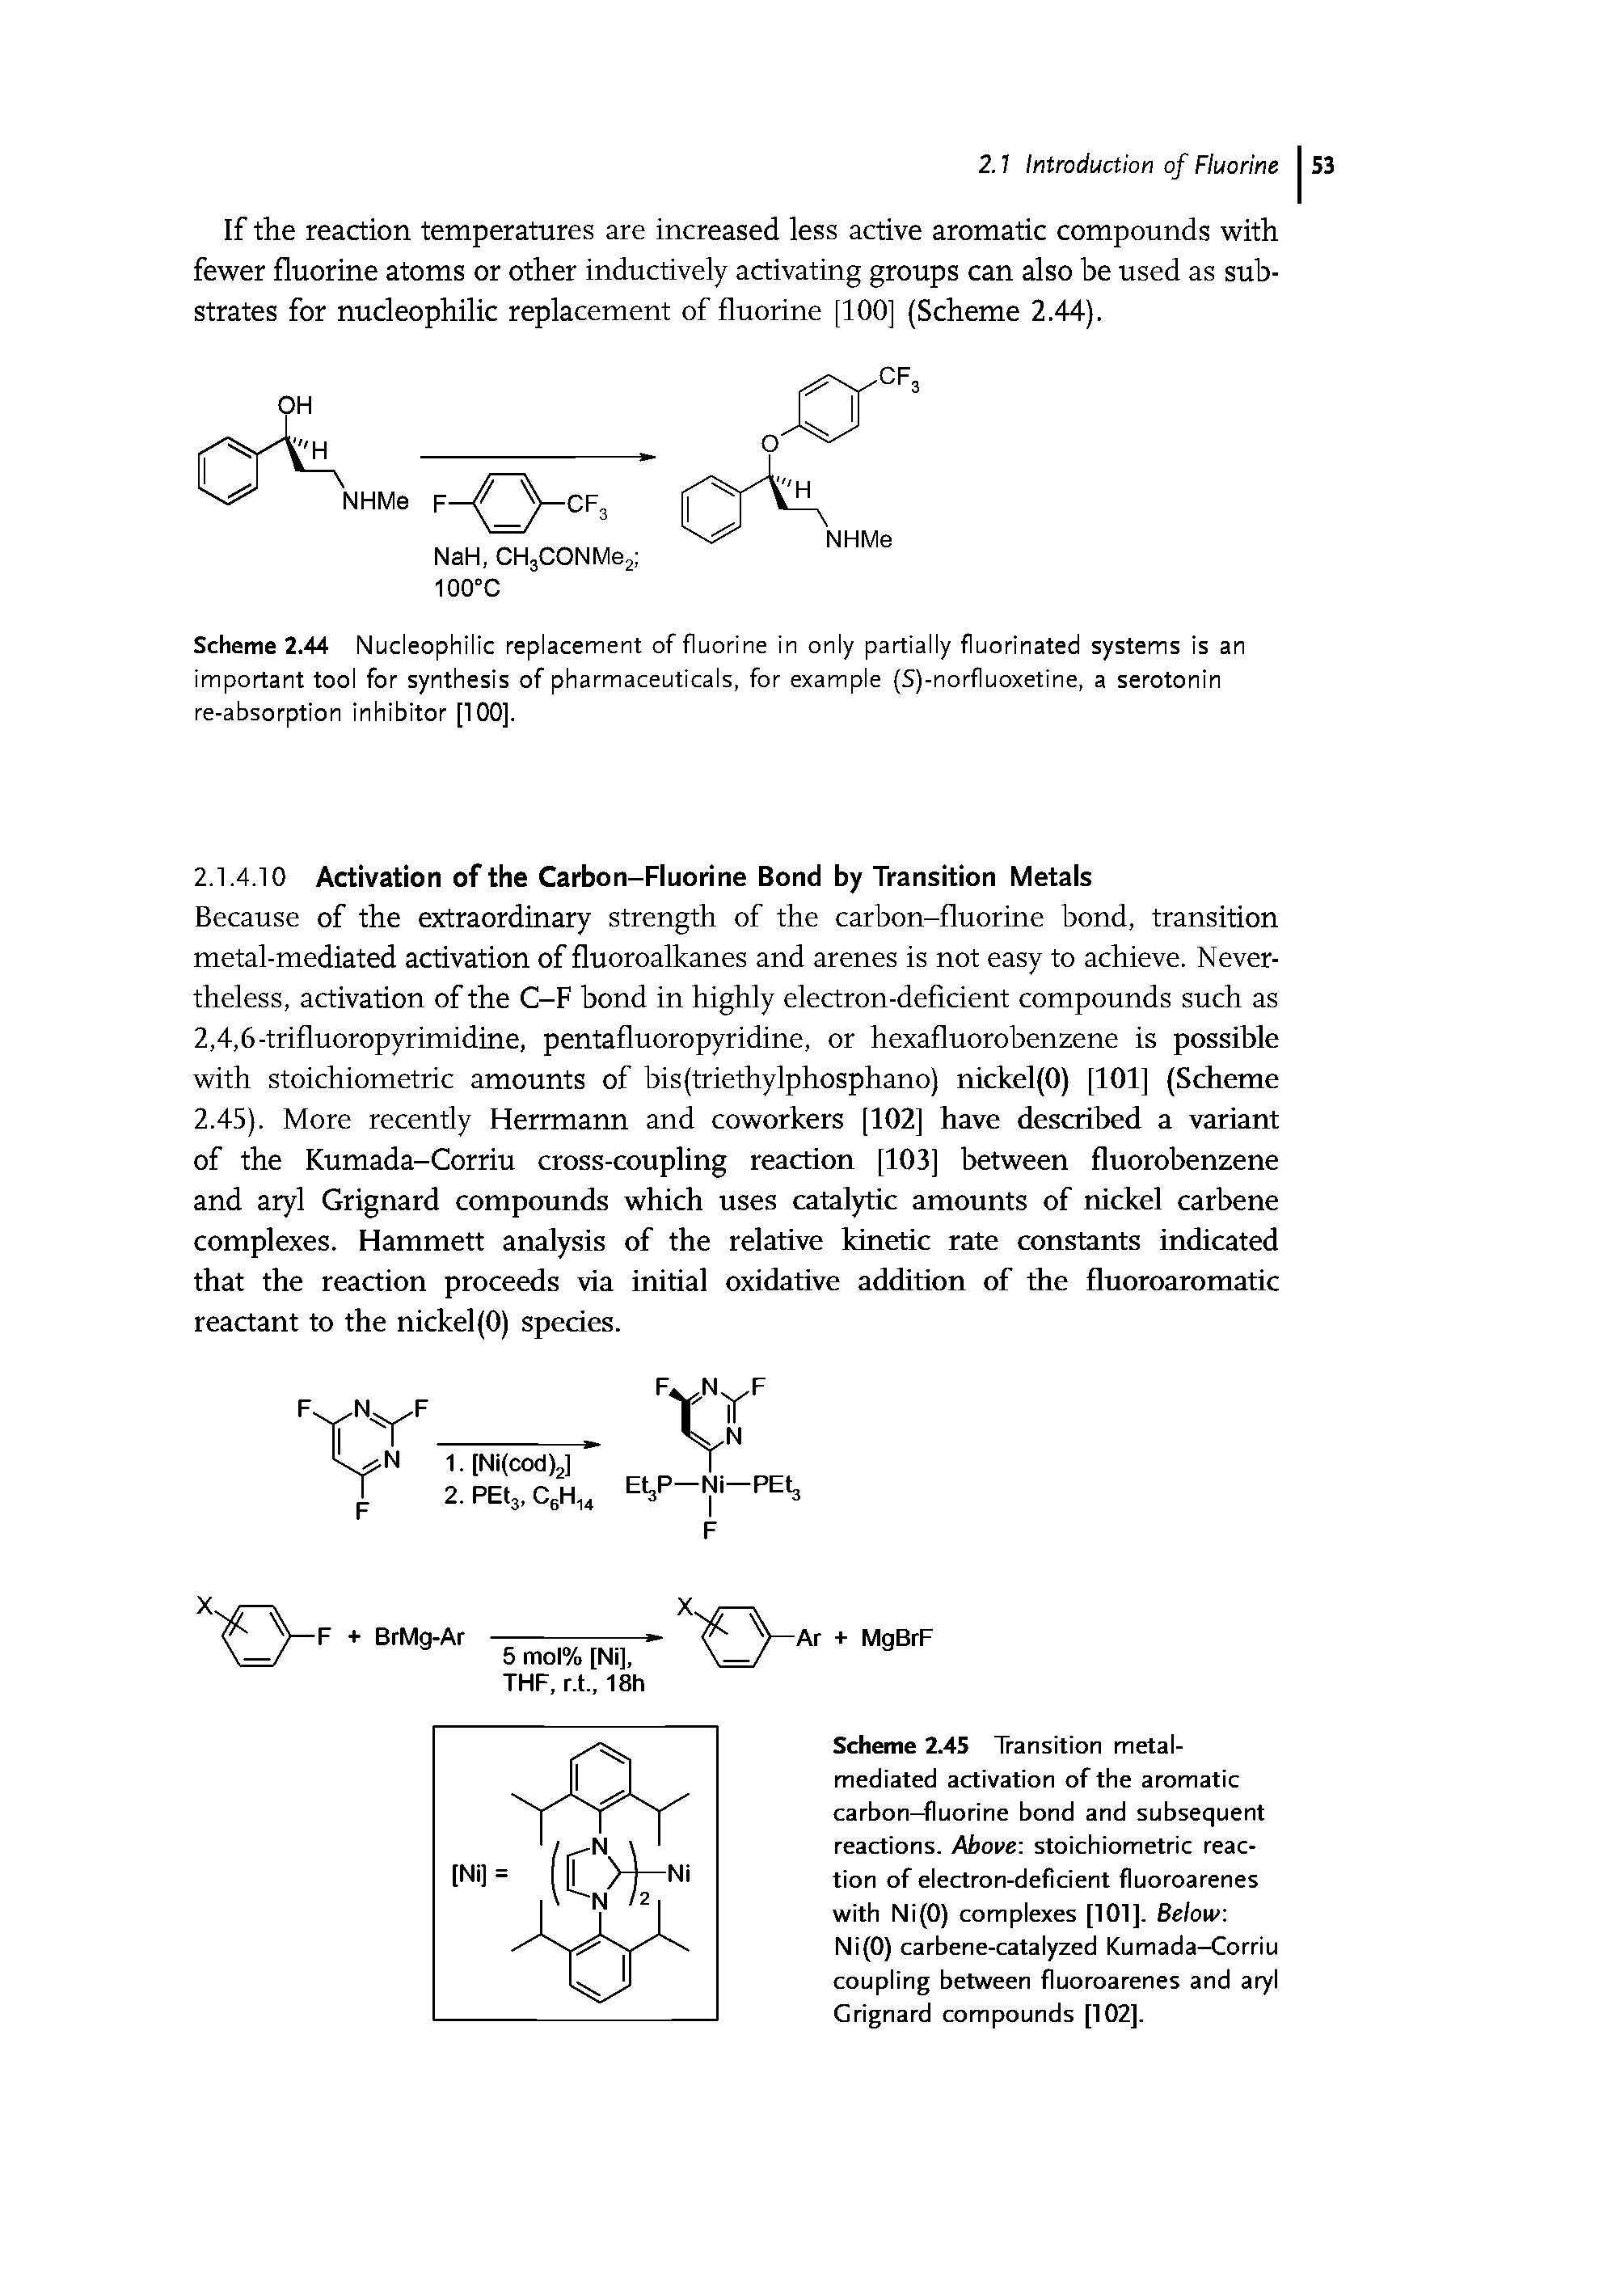 Scheme 2.45 Transition metal-mediated activation of the aromatic carbon—fluorine bond and subsequent reactions. Ahoue stoichiometric reaction of electron-deflclent fluoroarenes with NI(0) complexes [101]. Belou Ni(0) carbene-catalyzed Kumada-Corriu coupling between fluoroarenes and aryl Grignard compounds [102].